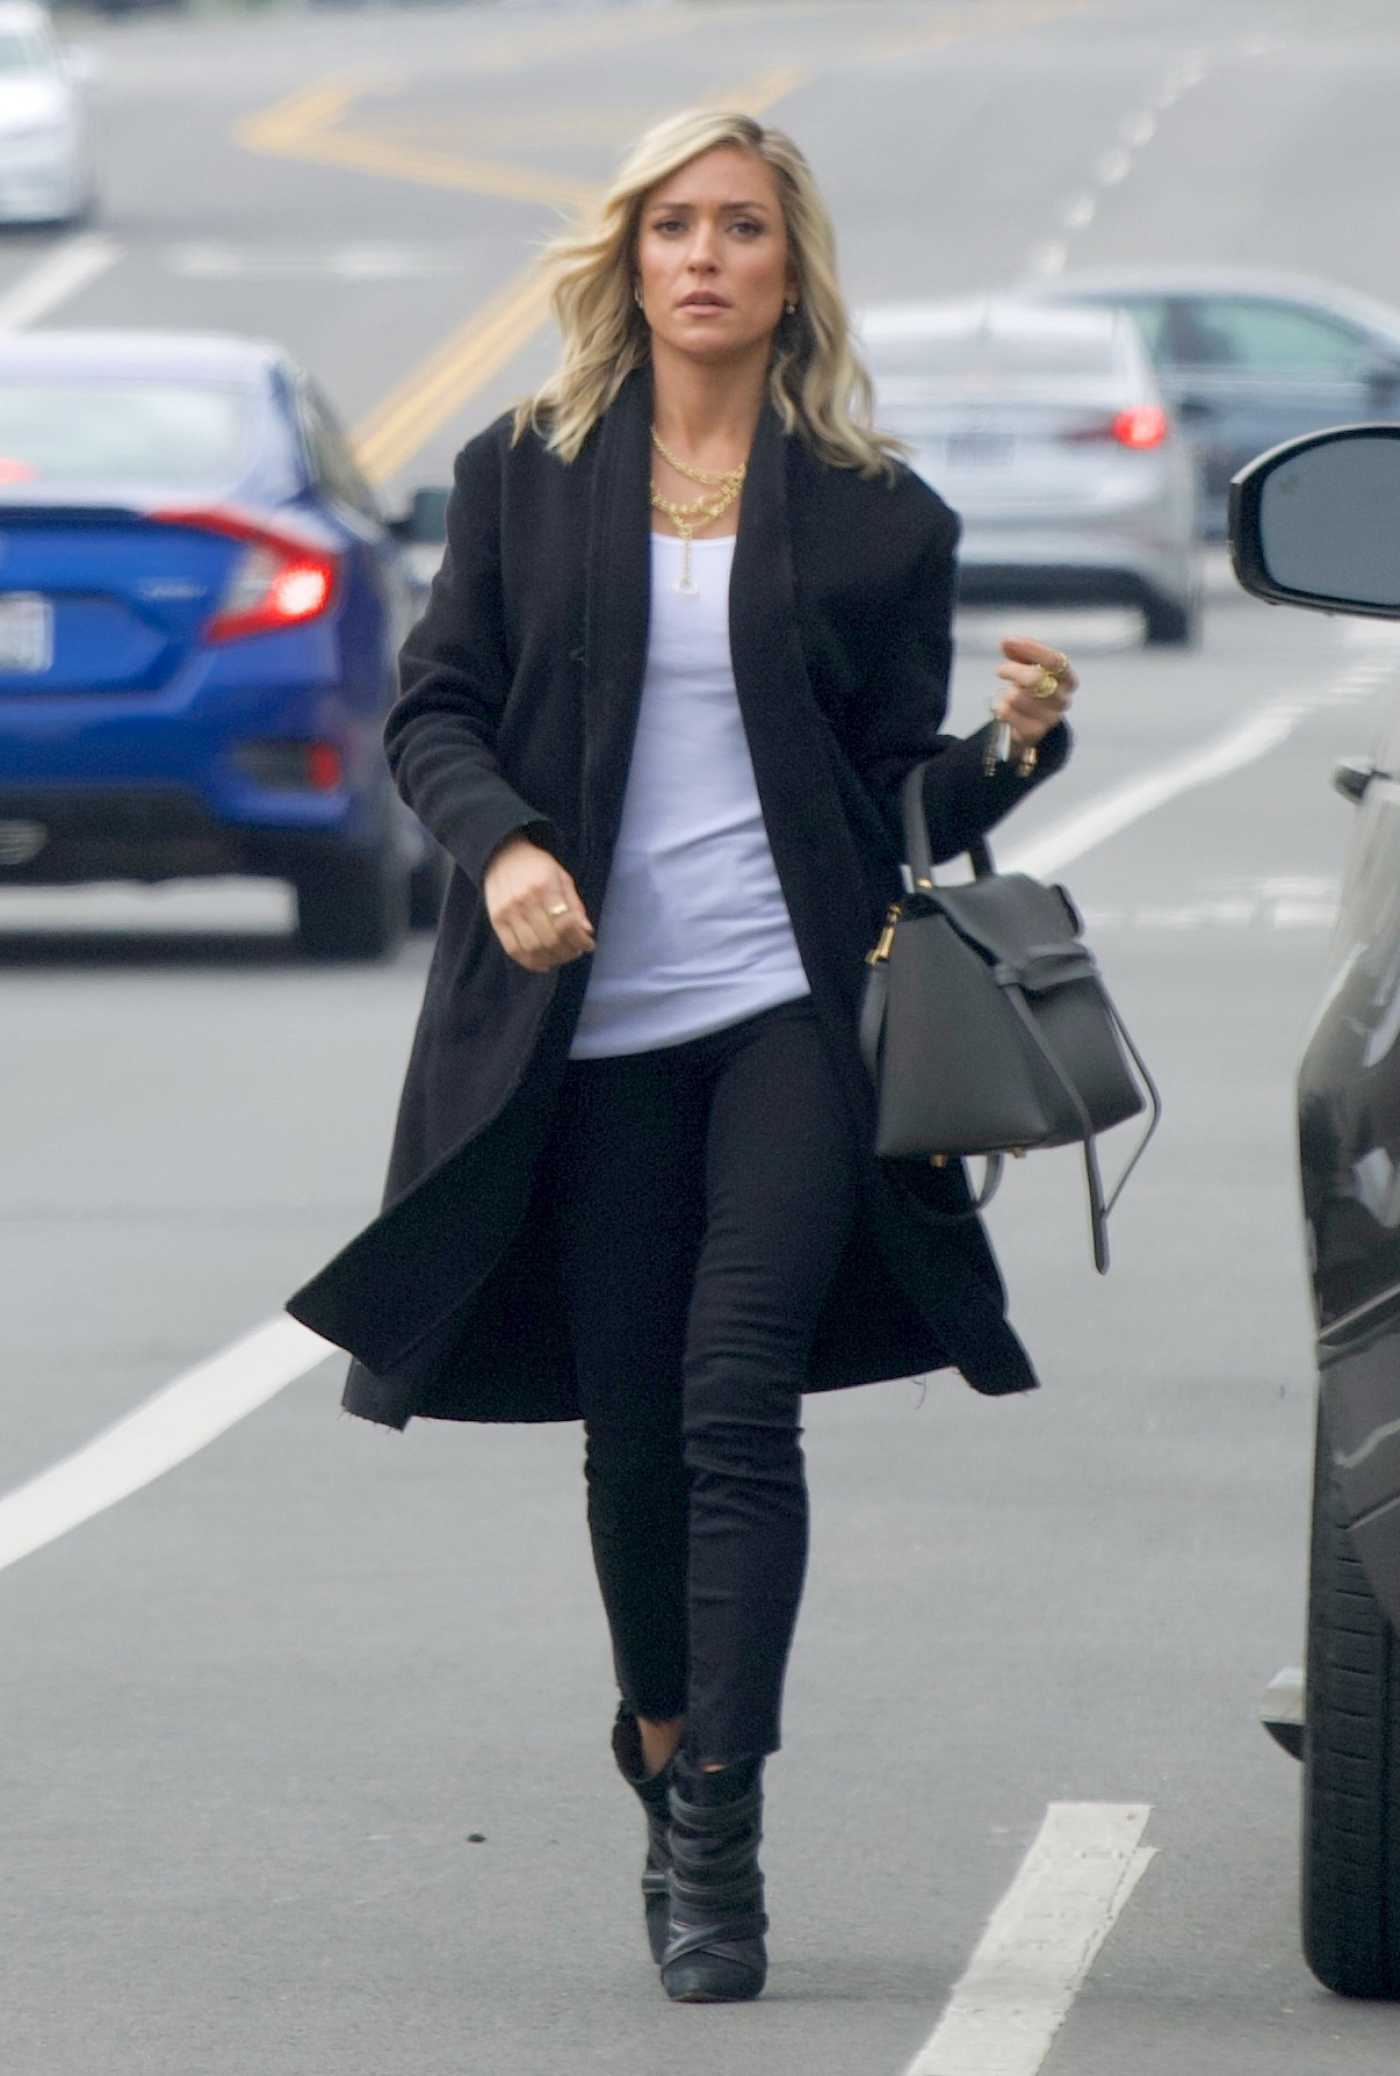 Kristin Cavallari in a Black Coat Was Spotted Out with Jeff Dye in Studio City 02/12/2021